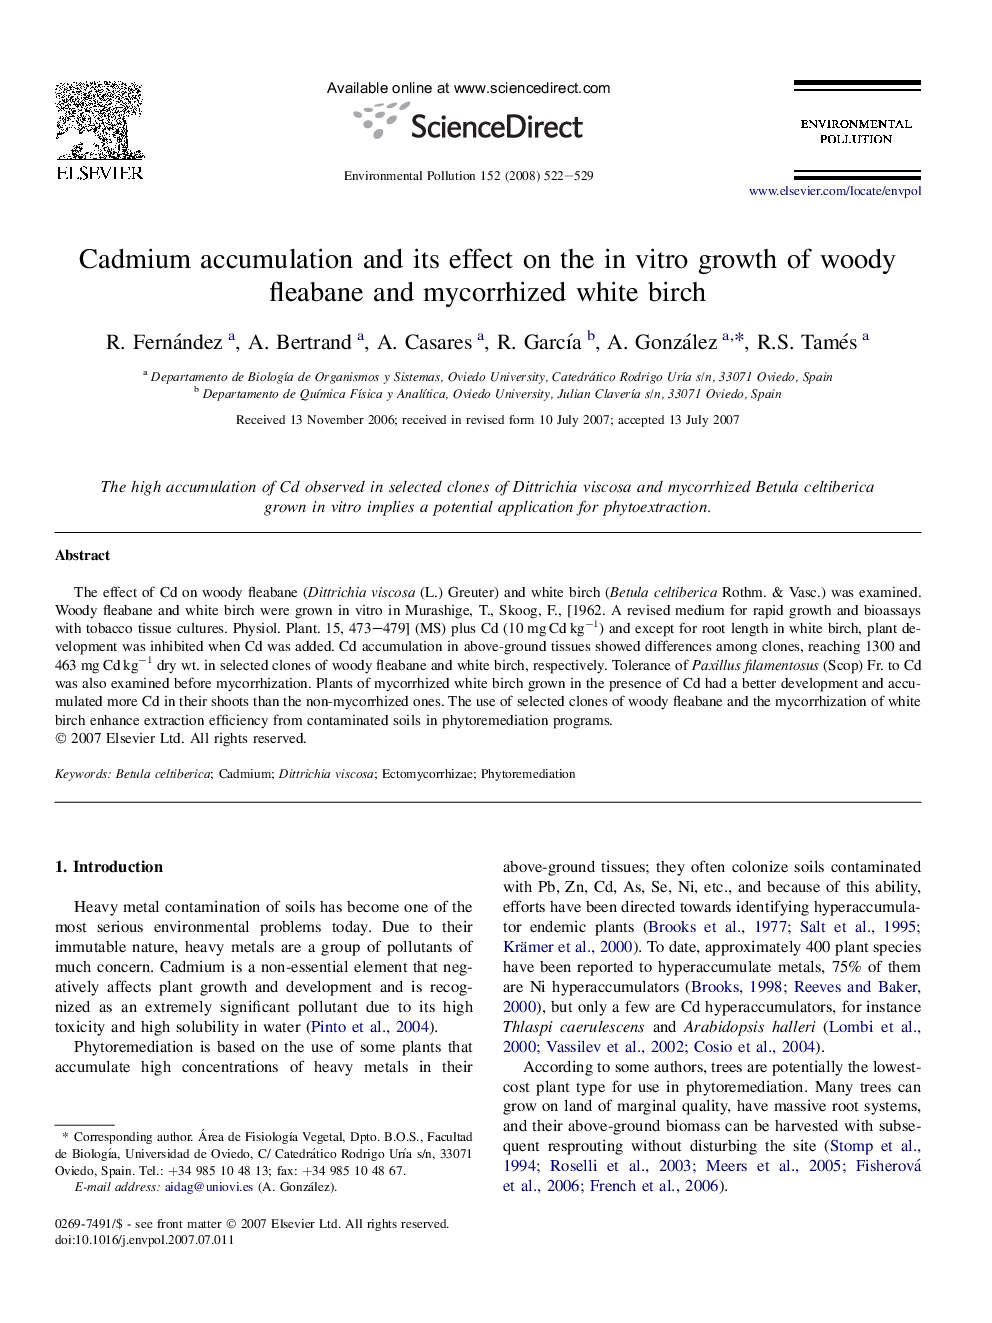 Cadmium accumulation and its effect on the in vitro growth of woody fleabane and mycorrhized white birch